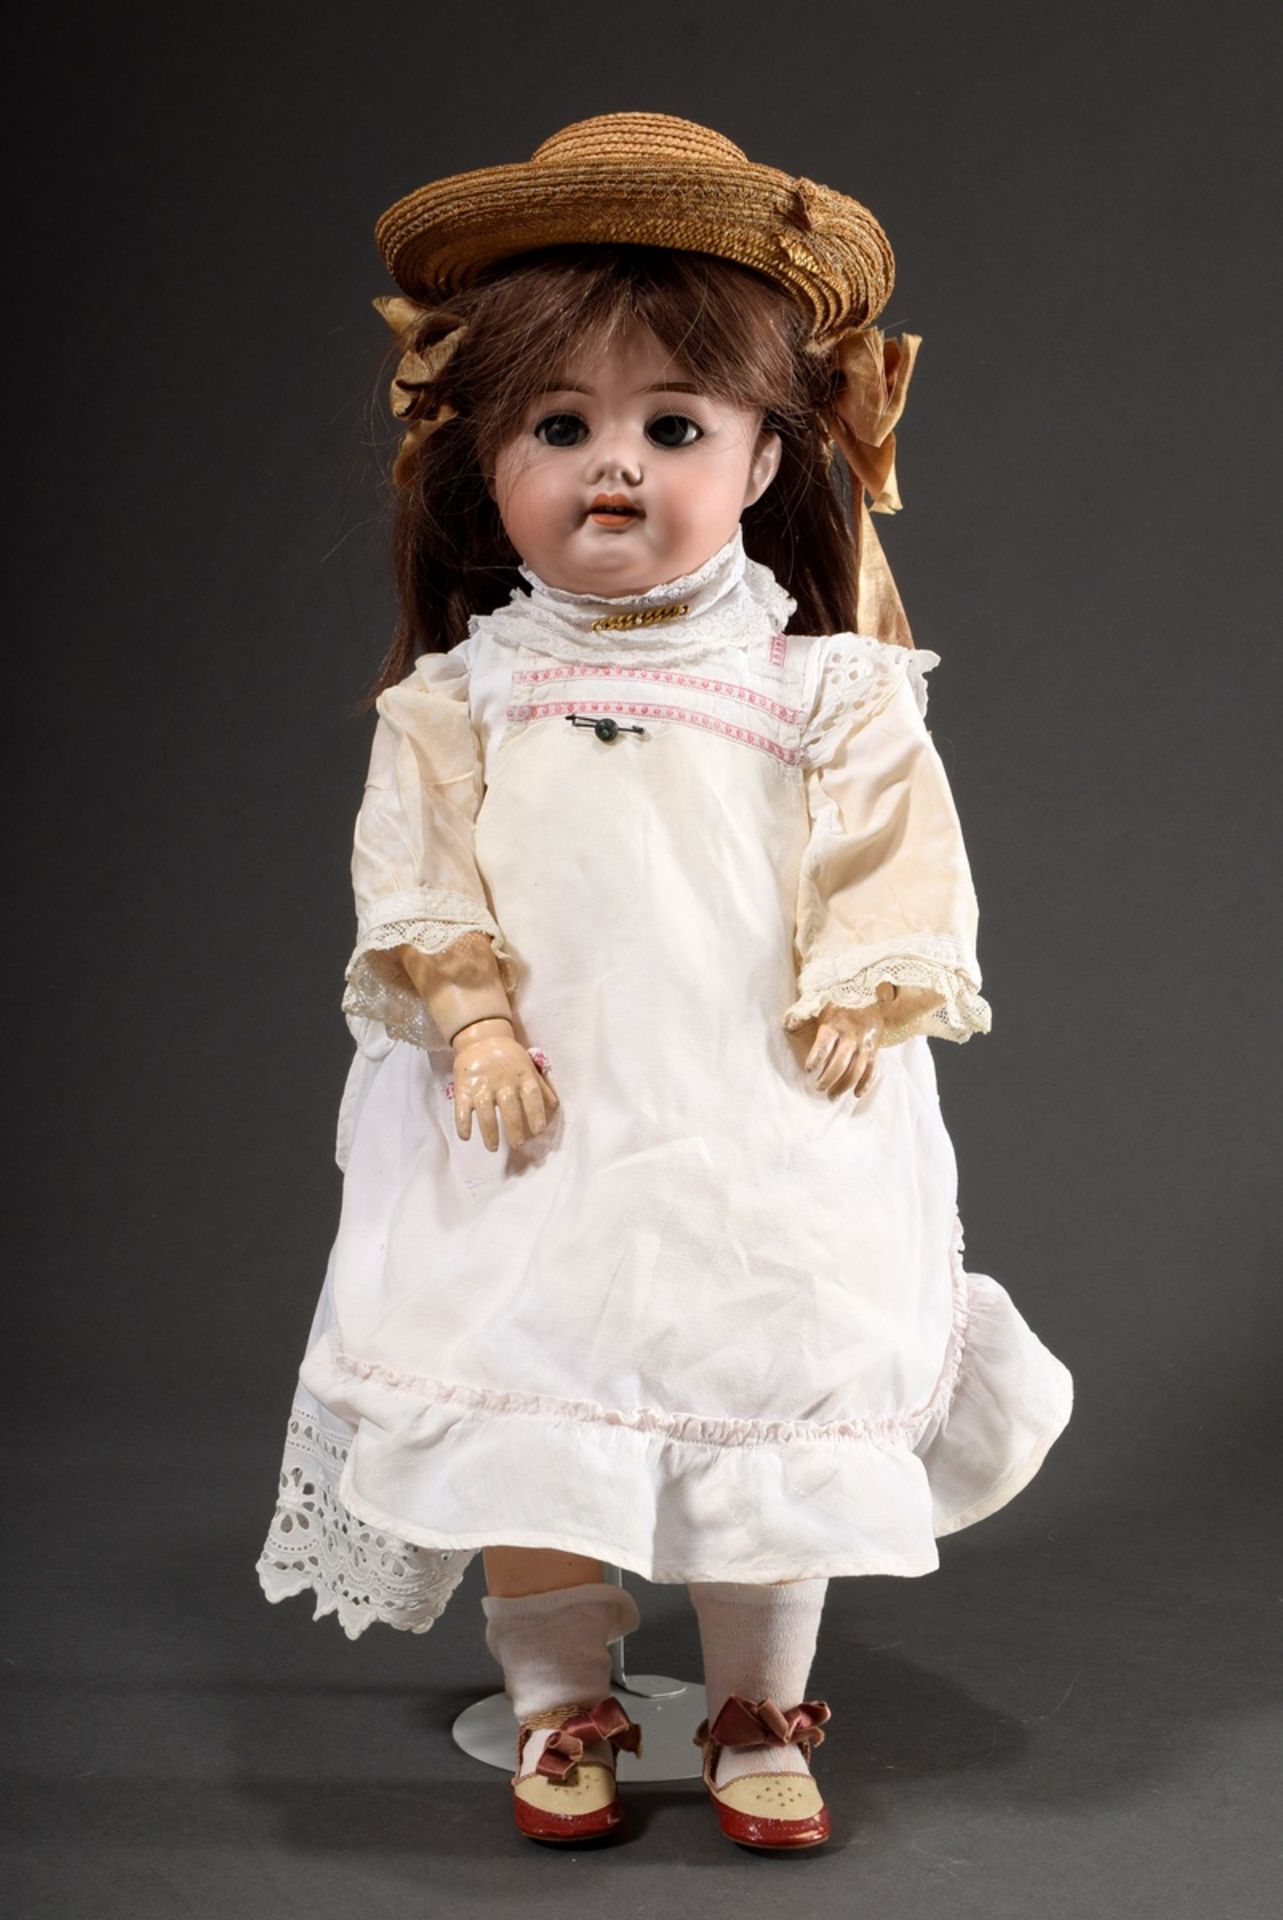 Doll with porcelain crank head and wooden/mass jointed body, brown human hair wig, blue glass eyes,